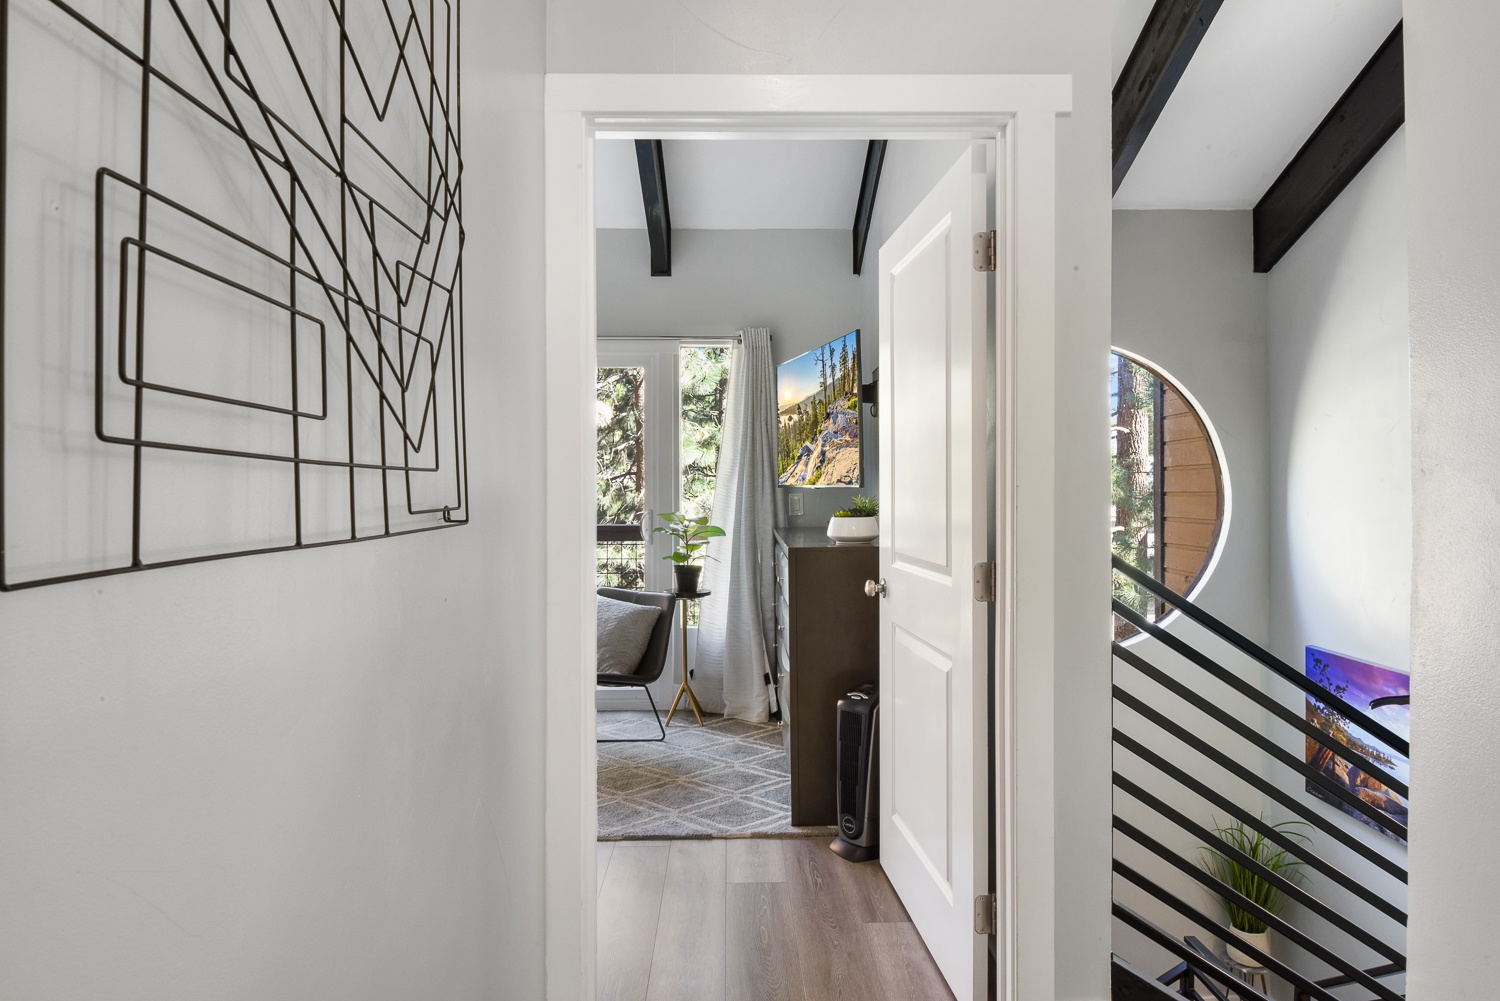 Head upstairs via the modern staircase to enjoy this home’s 3rd level